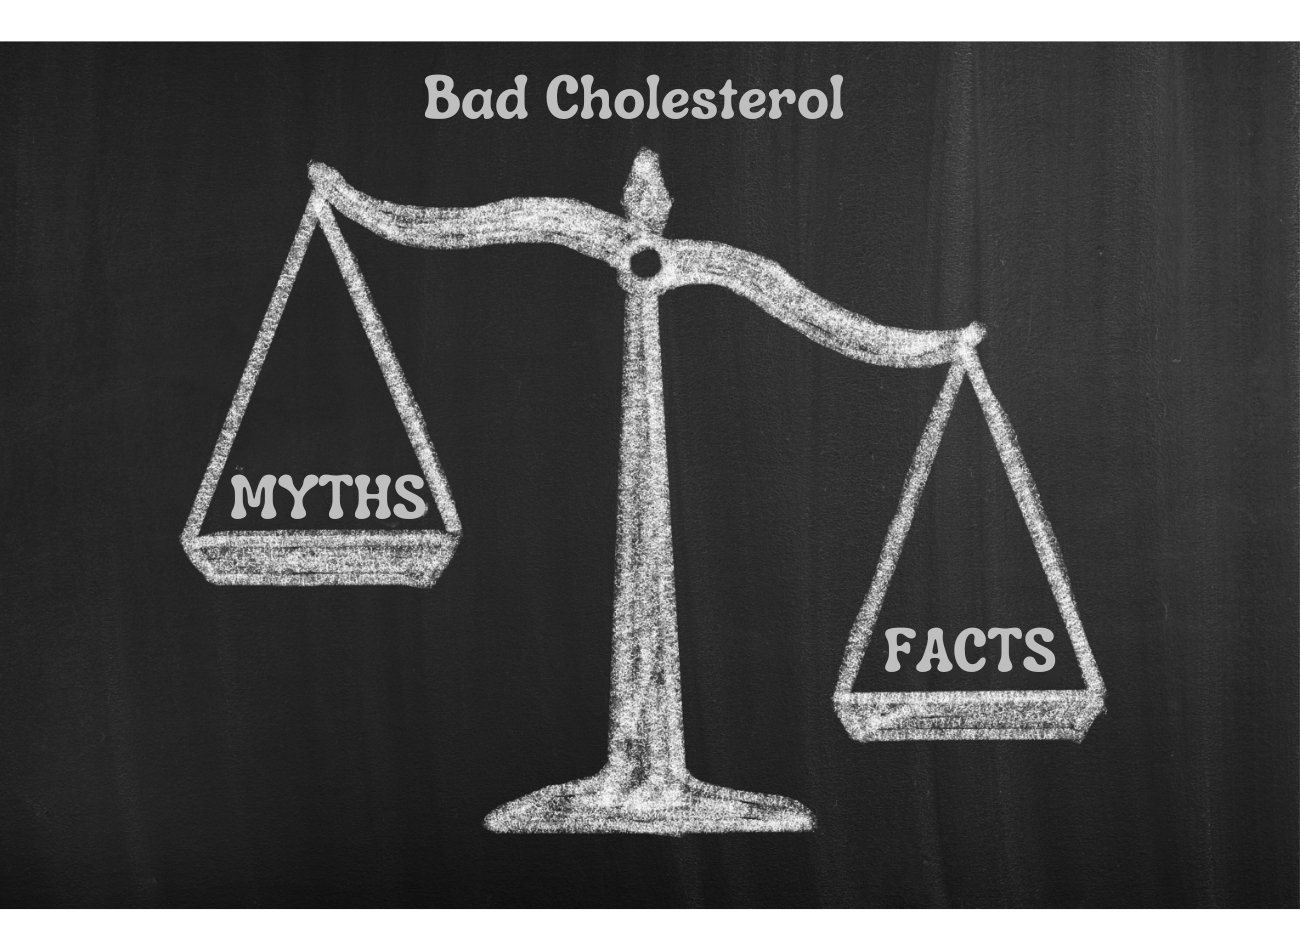 Common Myths and Facts About Bad Cholesterol